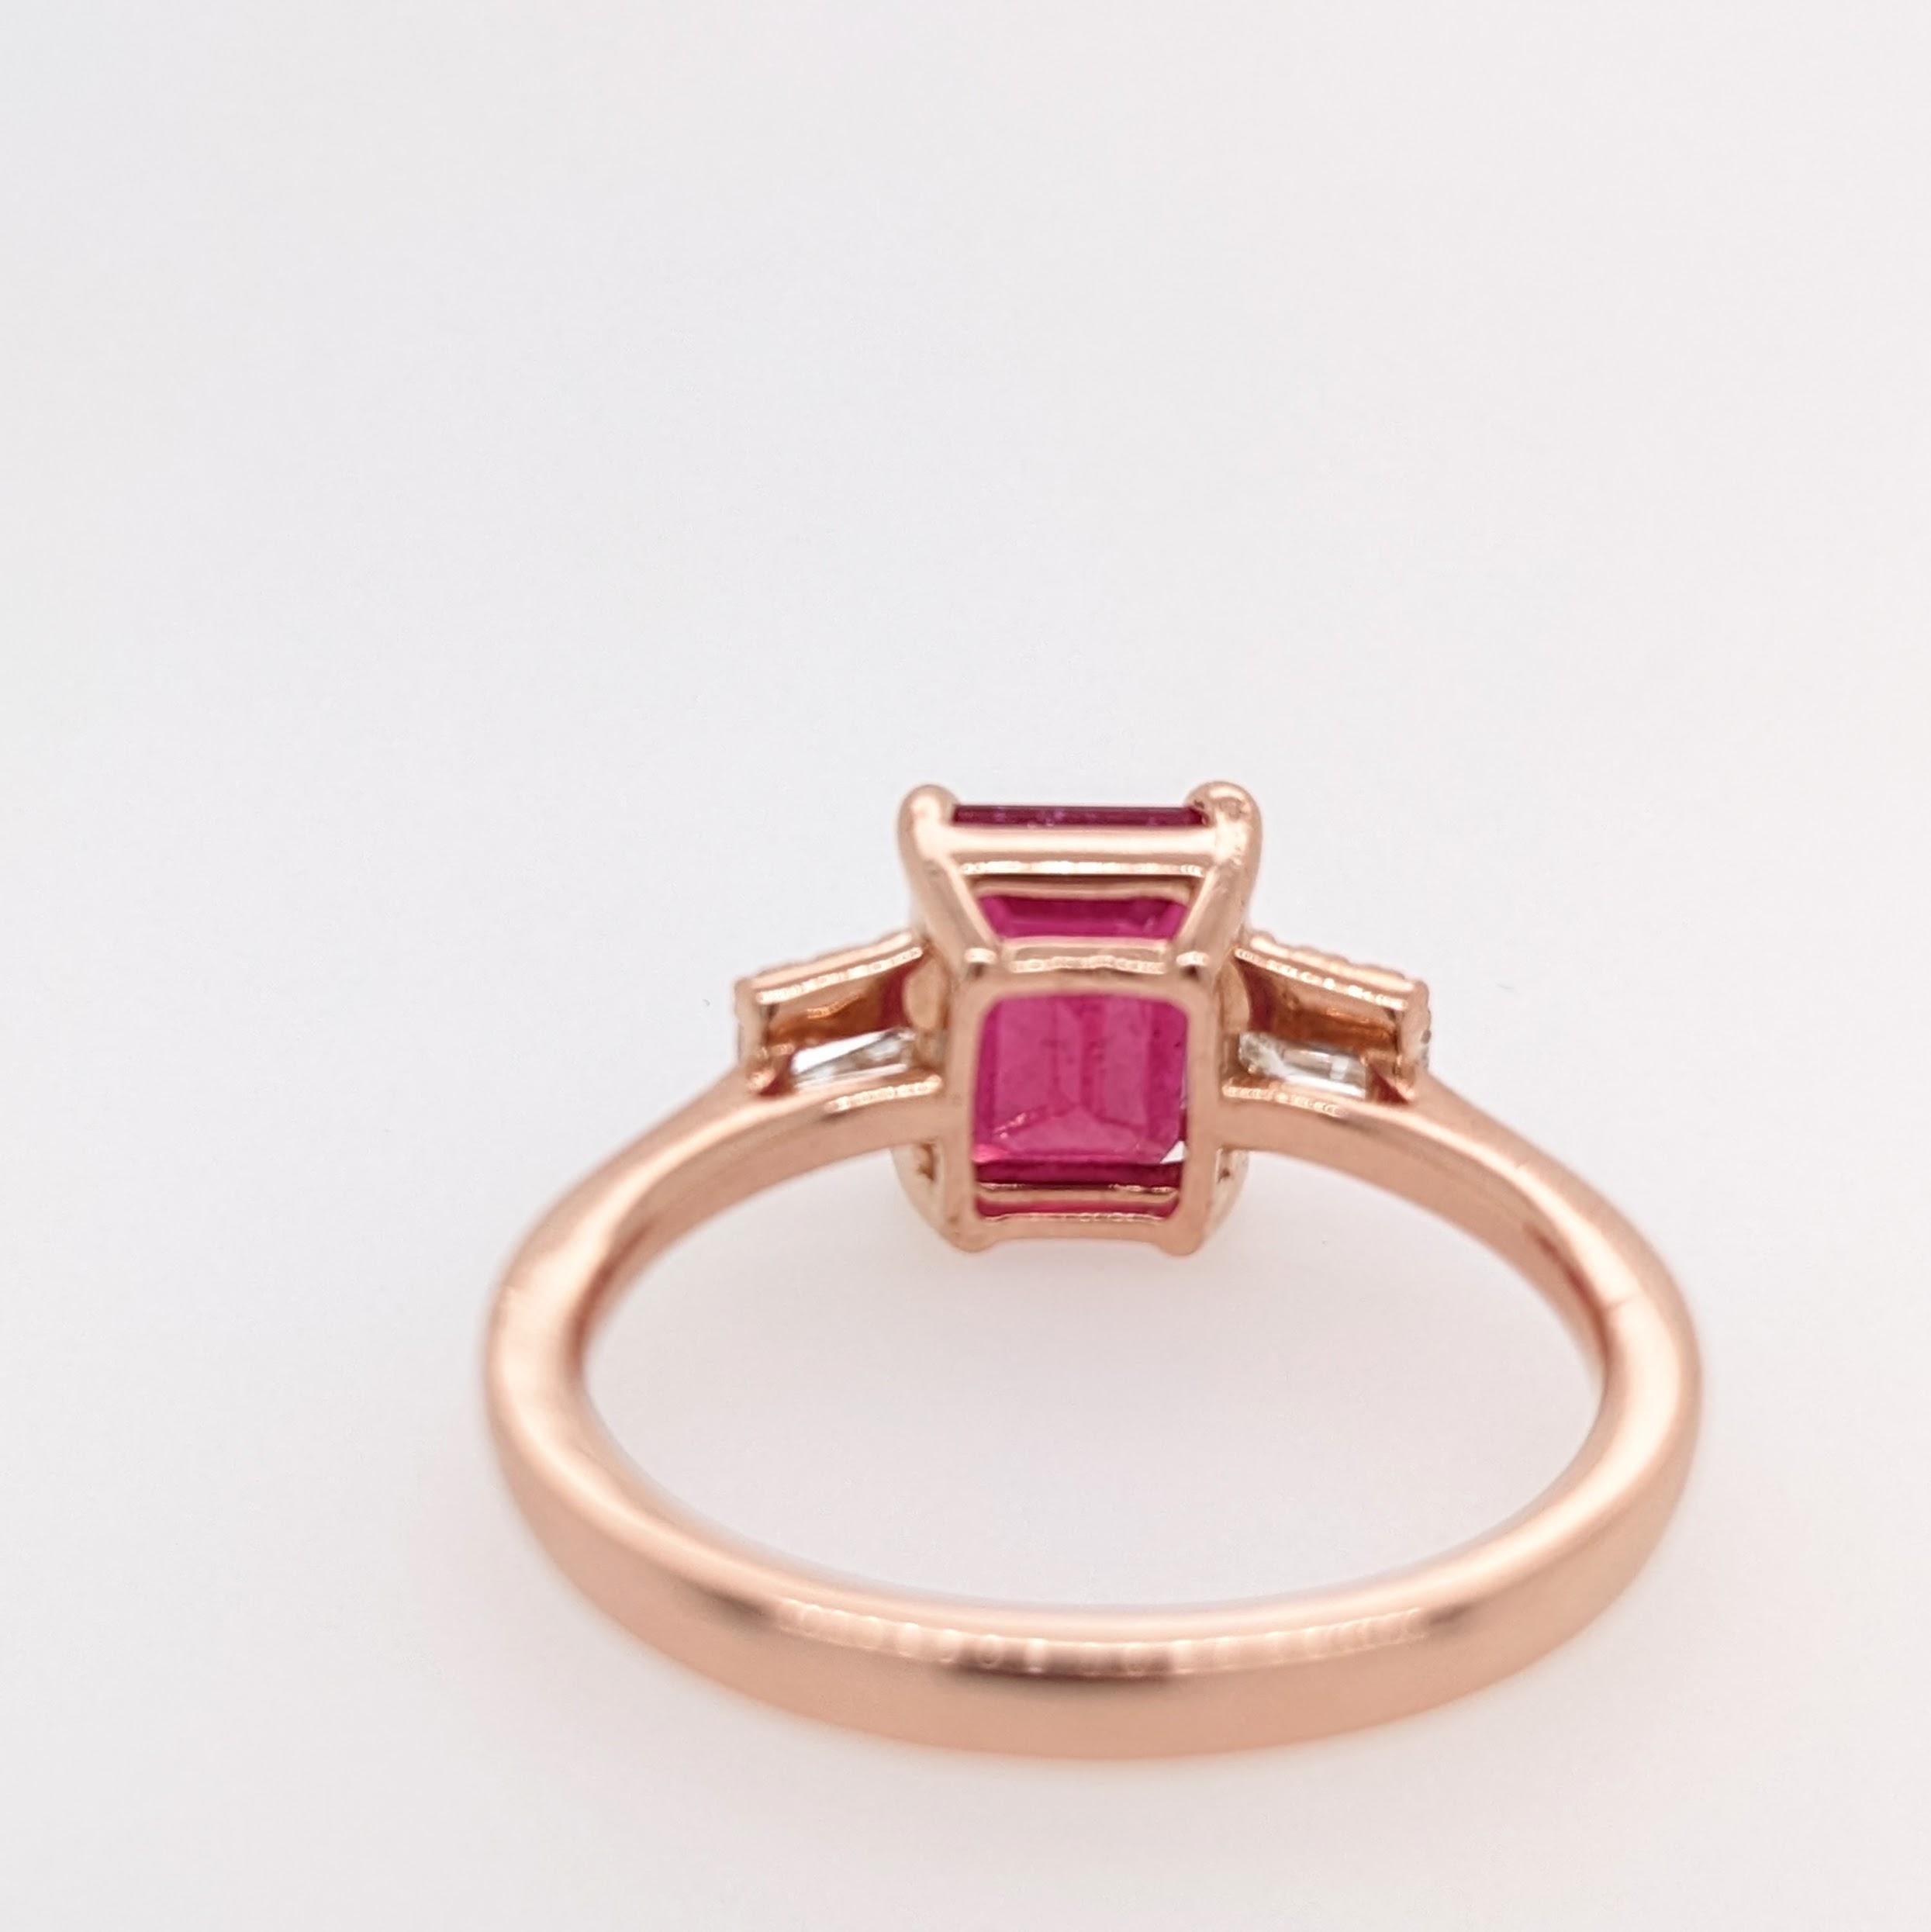 2.61ct Ruby Ring with Natural Diamond Accents in 14K Rose Gold Emerald Cut 8x6mm For Sale 3